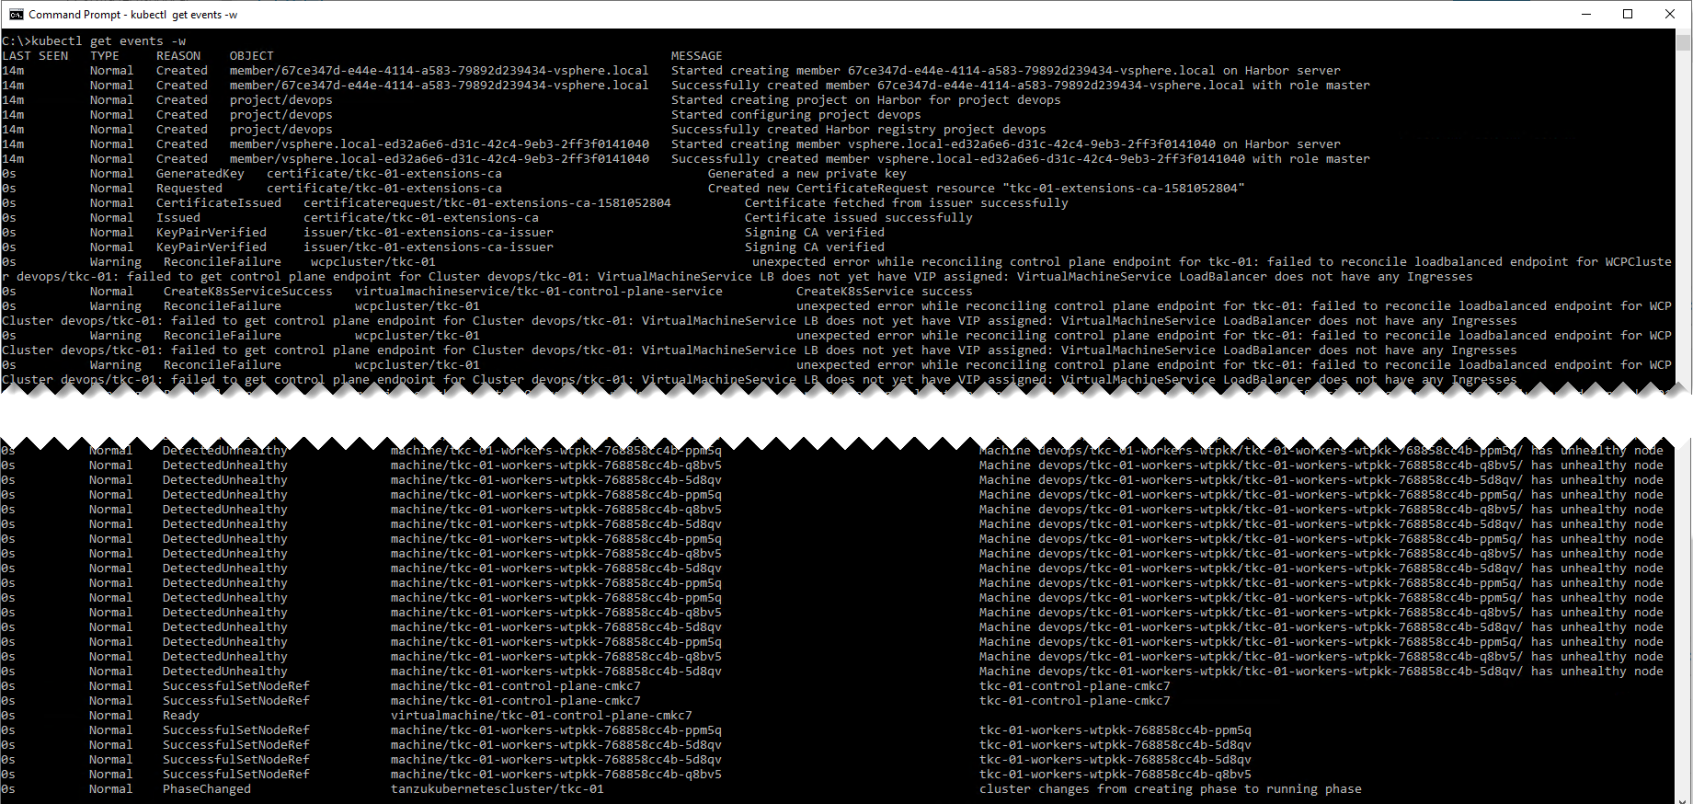 Command prompt using kubectl to monitor the deployment of TKG cluster